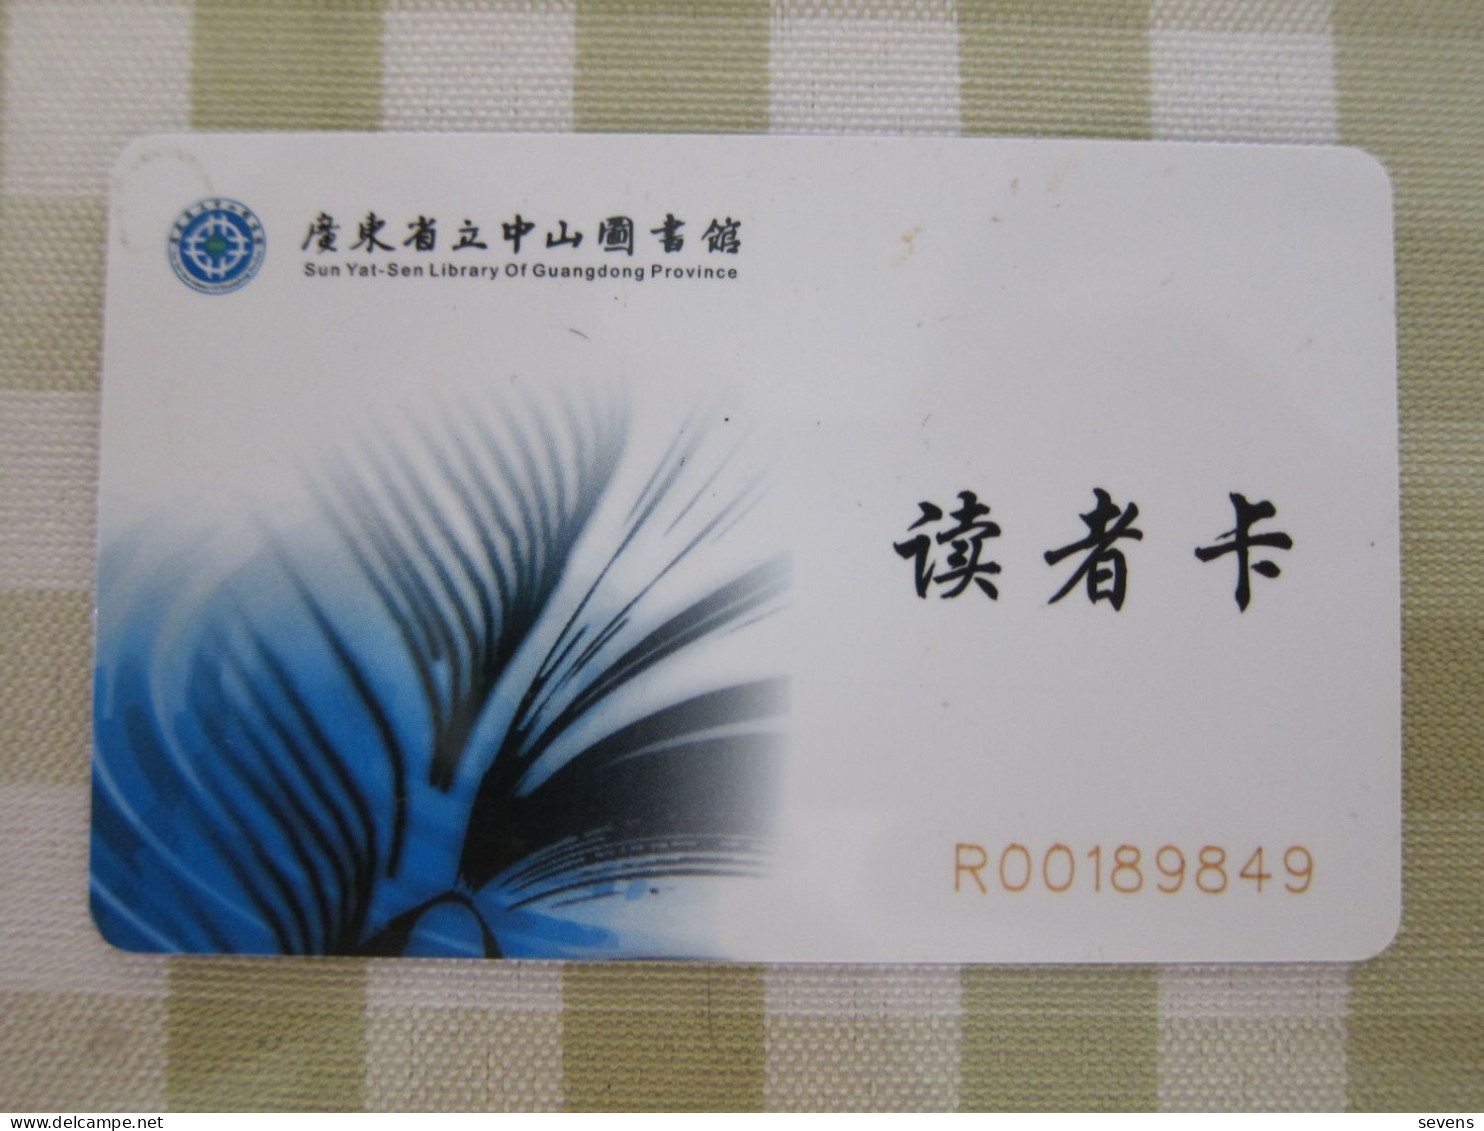 Sun Yai-Sen Library Of Guangdong Province(China) Library Card - Unclassified